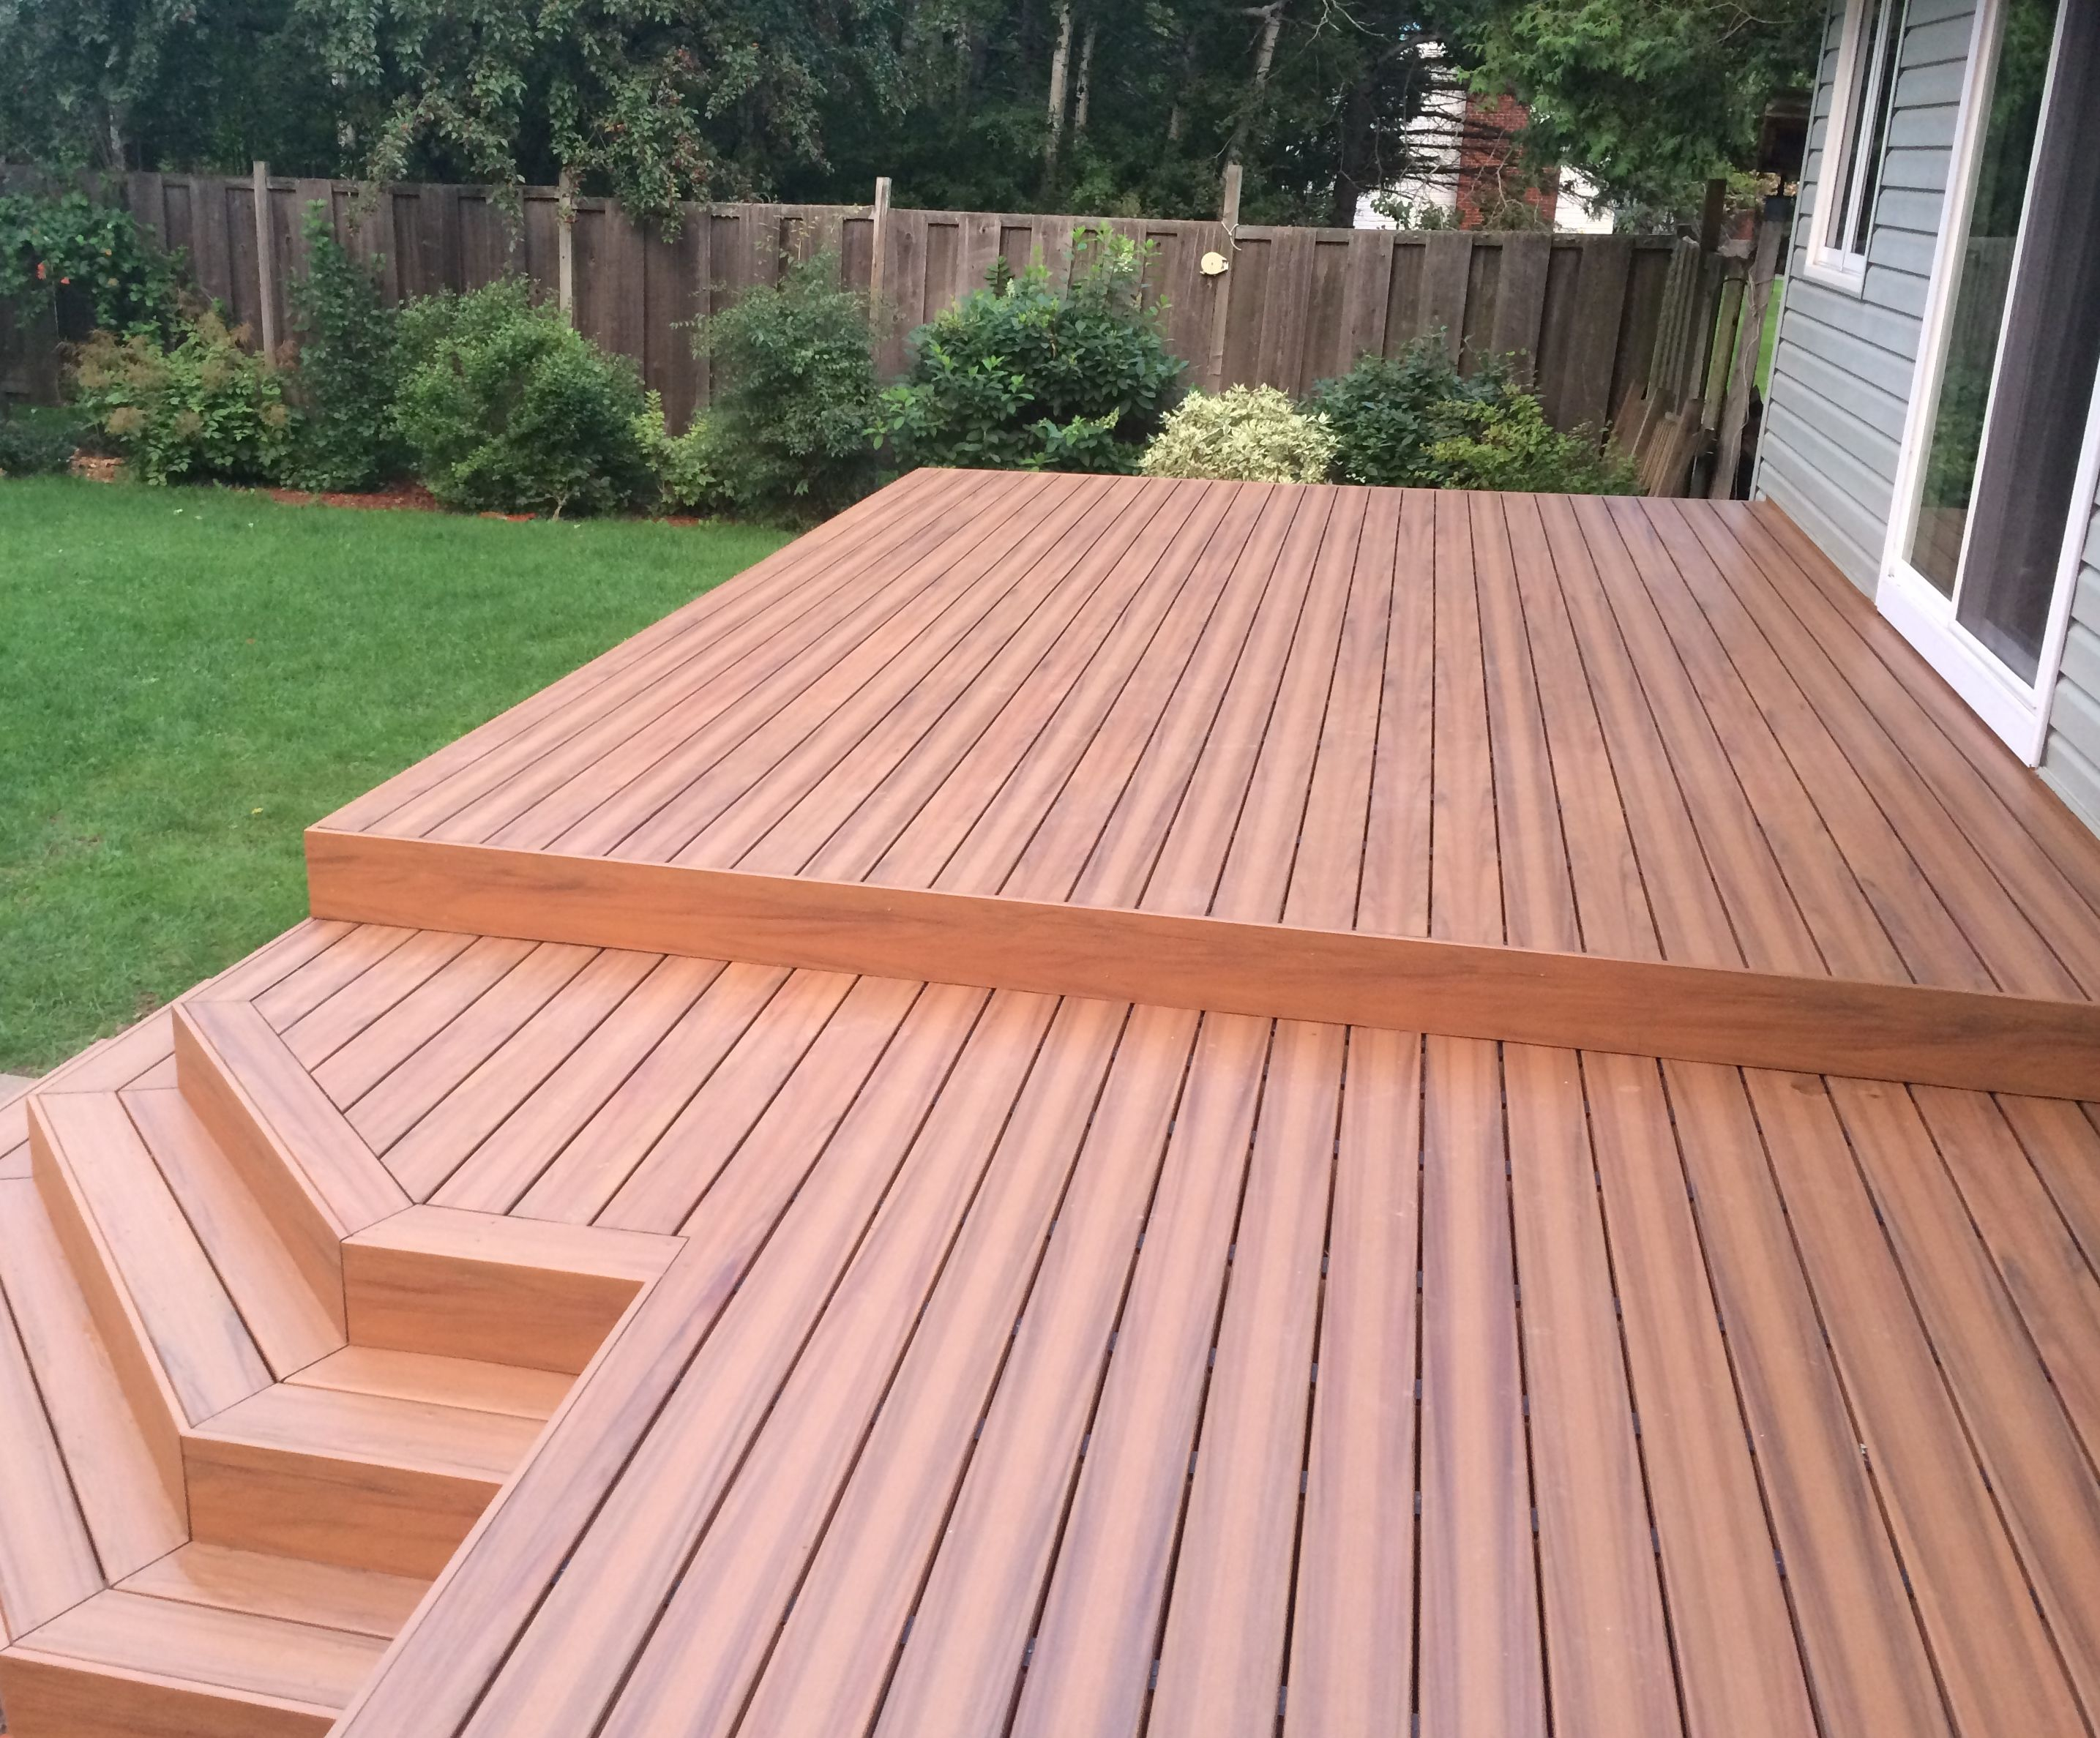 Armadillo Deck Painted Desert Deck Life Deck Seating Deck within measurements 2869 X 2375